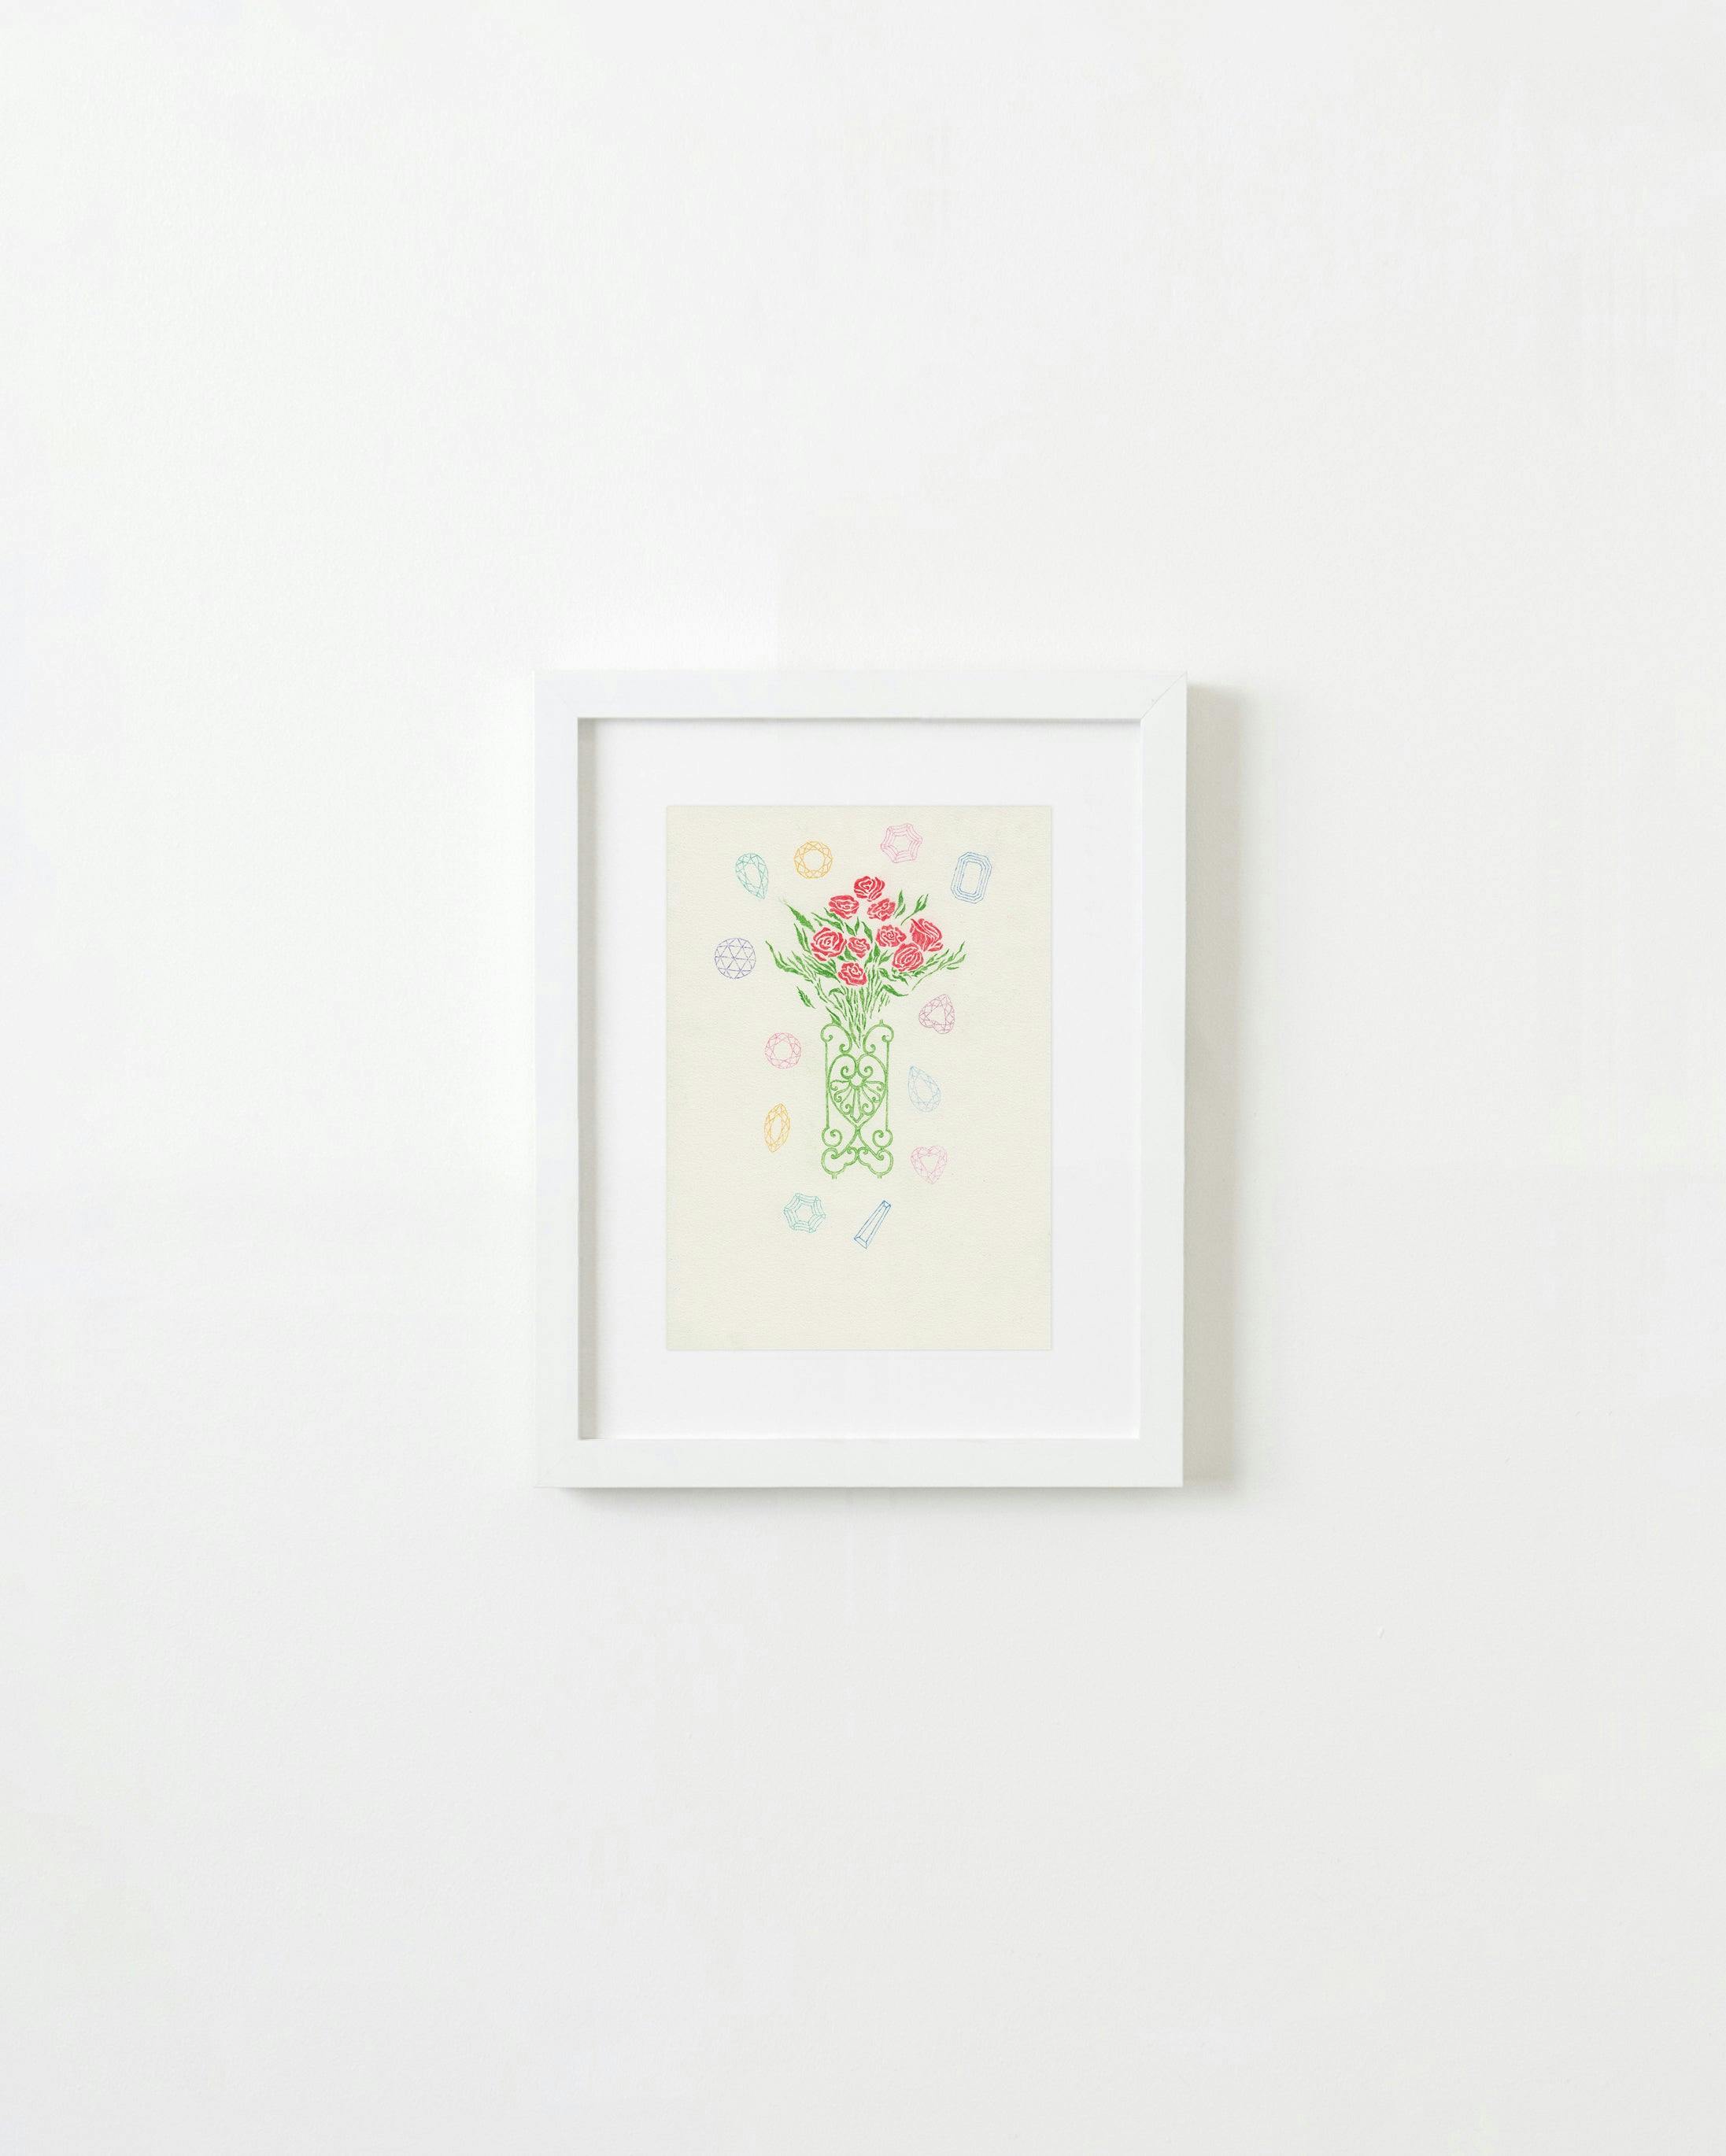 Drawing by Giulia Palombino titled "Grateful bouquet".